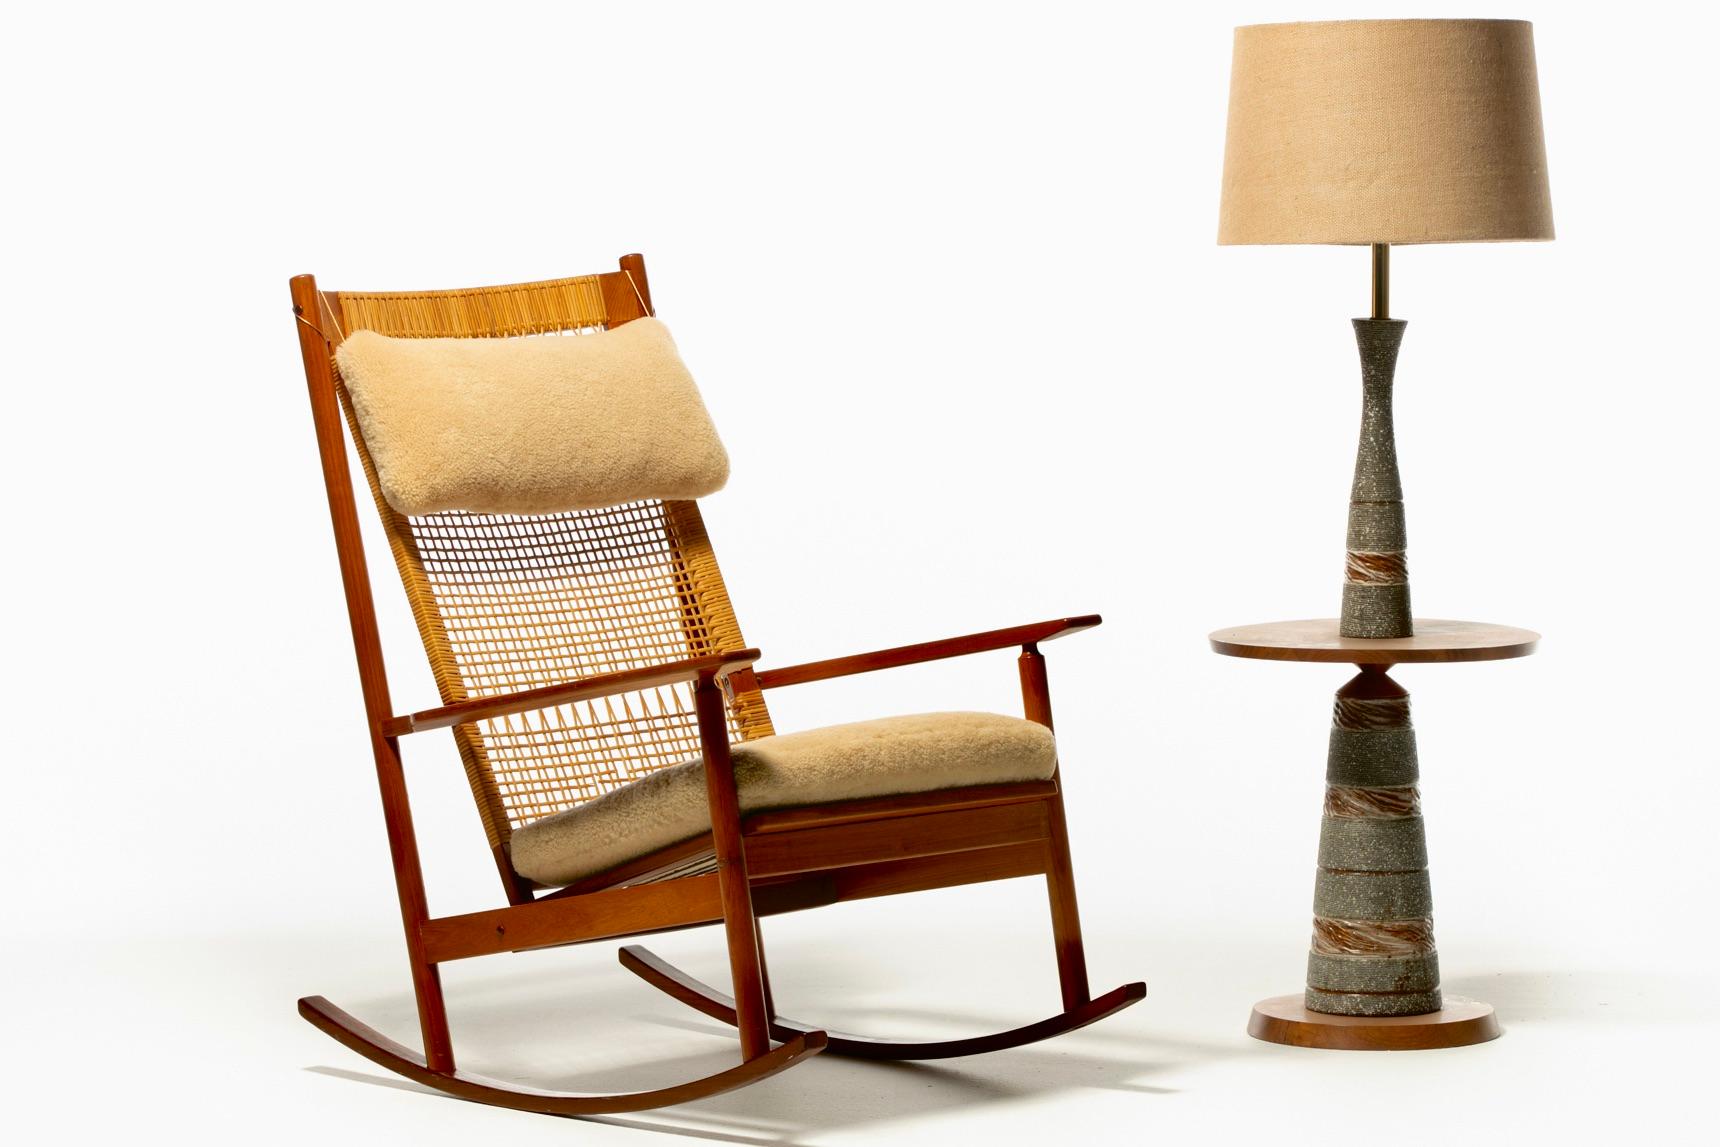 Beautiful early 1960s Danish teak and cane rocking chair Model 532A designed by Hans Olsen and produced by Juul Kristensen. This Danish Modern rocking chair exudes a warm and nurturing energy. Throughout the last 6 decades, the teak frame was